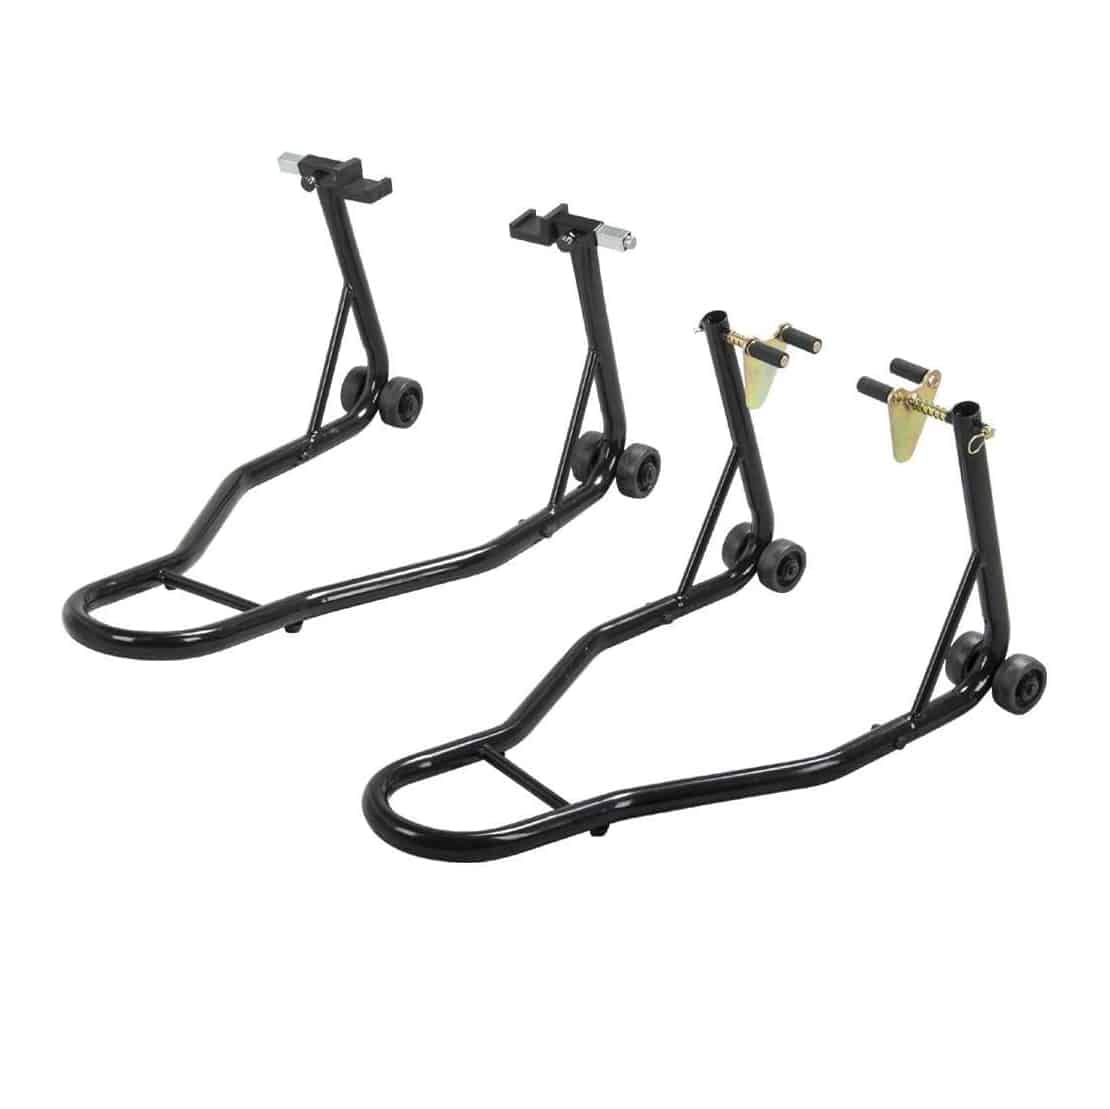 Top 10 Best Motorcycle Stands in 2021 Reviews l Buyer's Guide